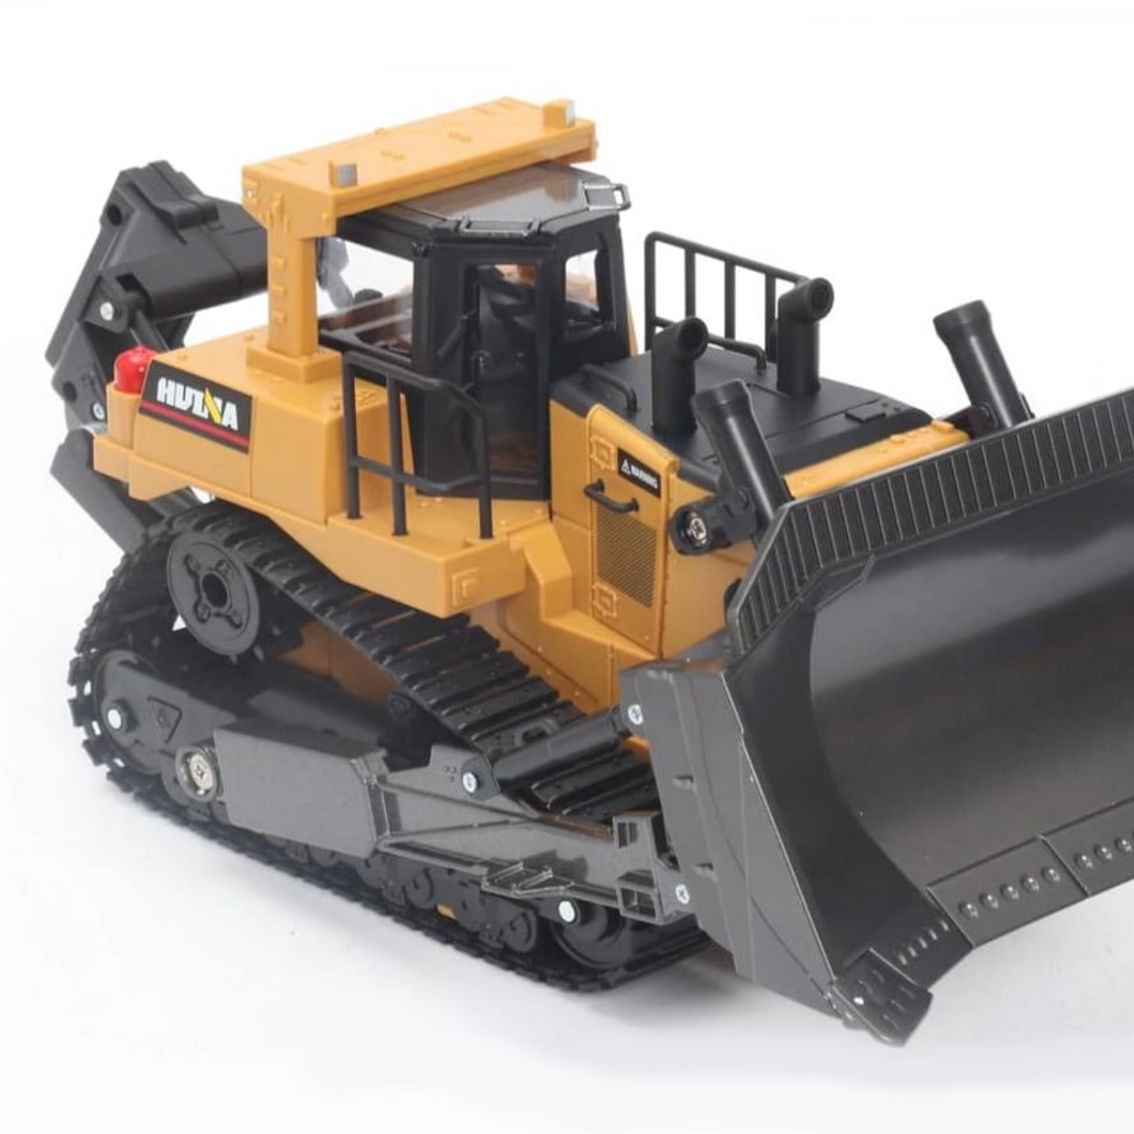 CIS-1569 1:16 scale 11 Ch Bulldozer with 2.4 GHz remote and rechargeable batteries - Image 5 of 5